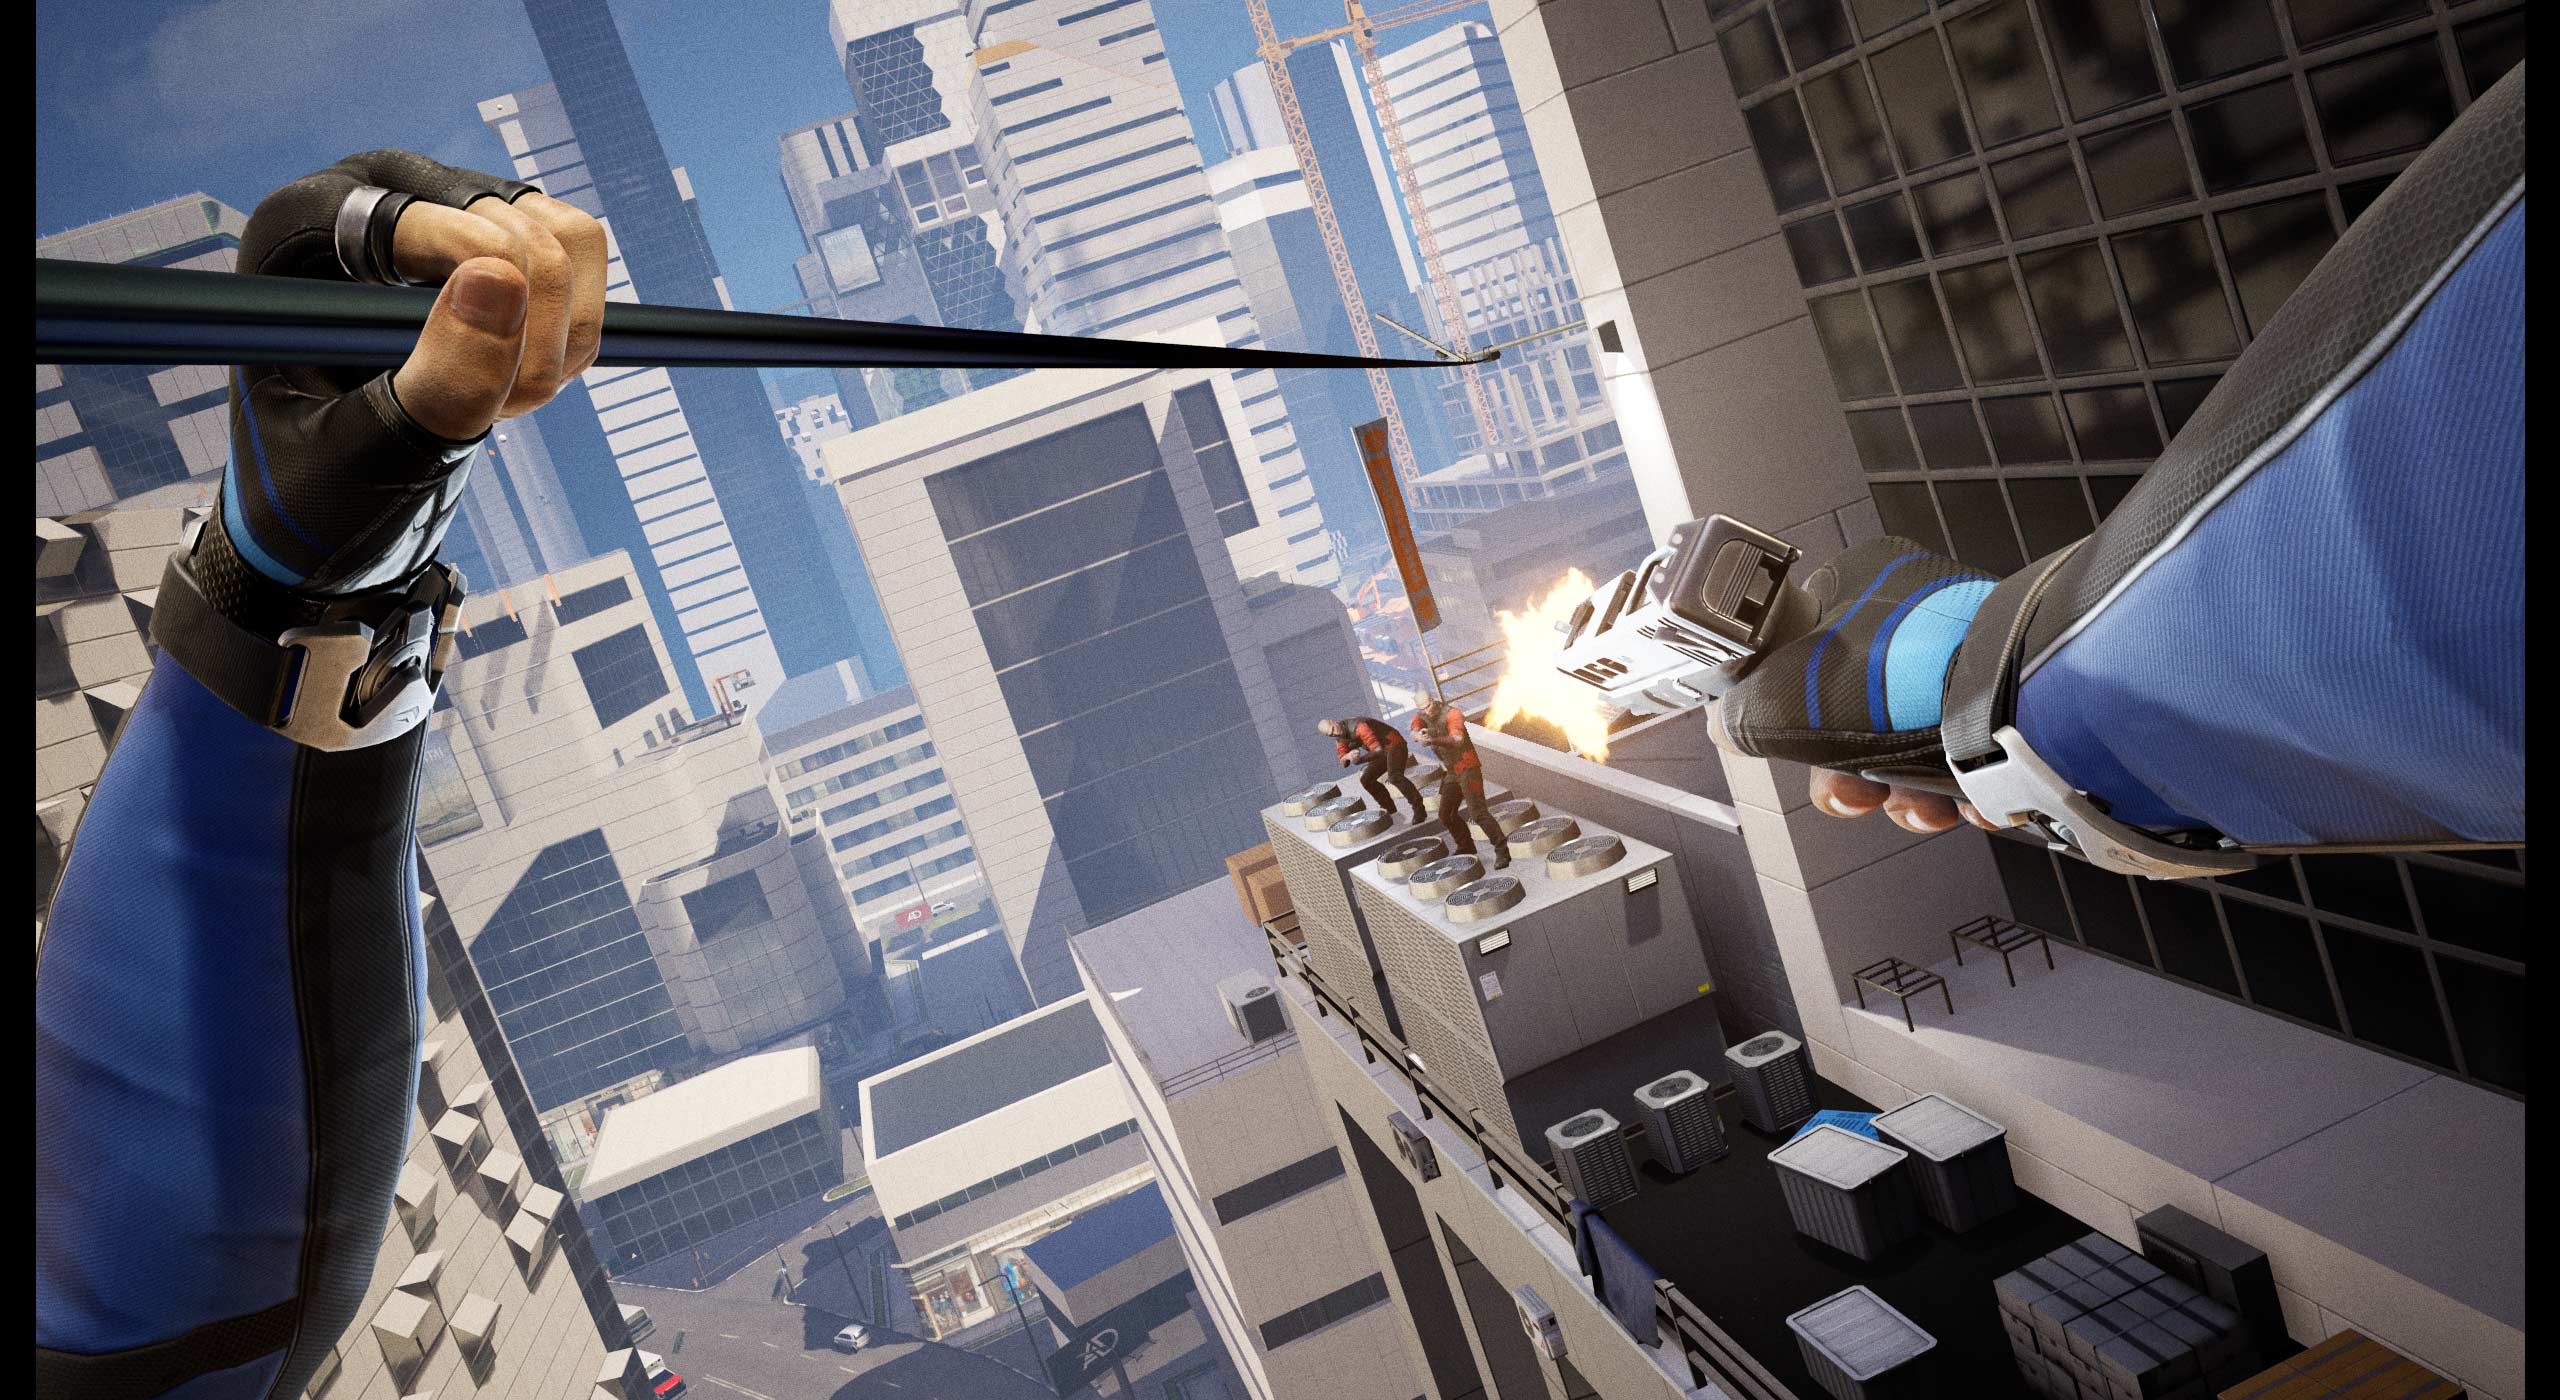 [Mirror's Edge Catalyst] Stunning game on PS5, overall way less